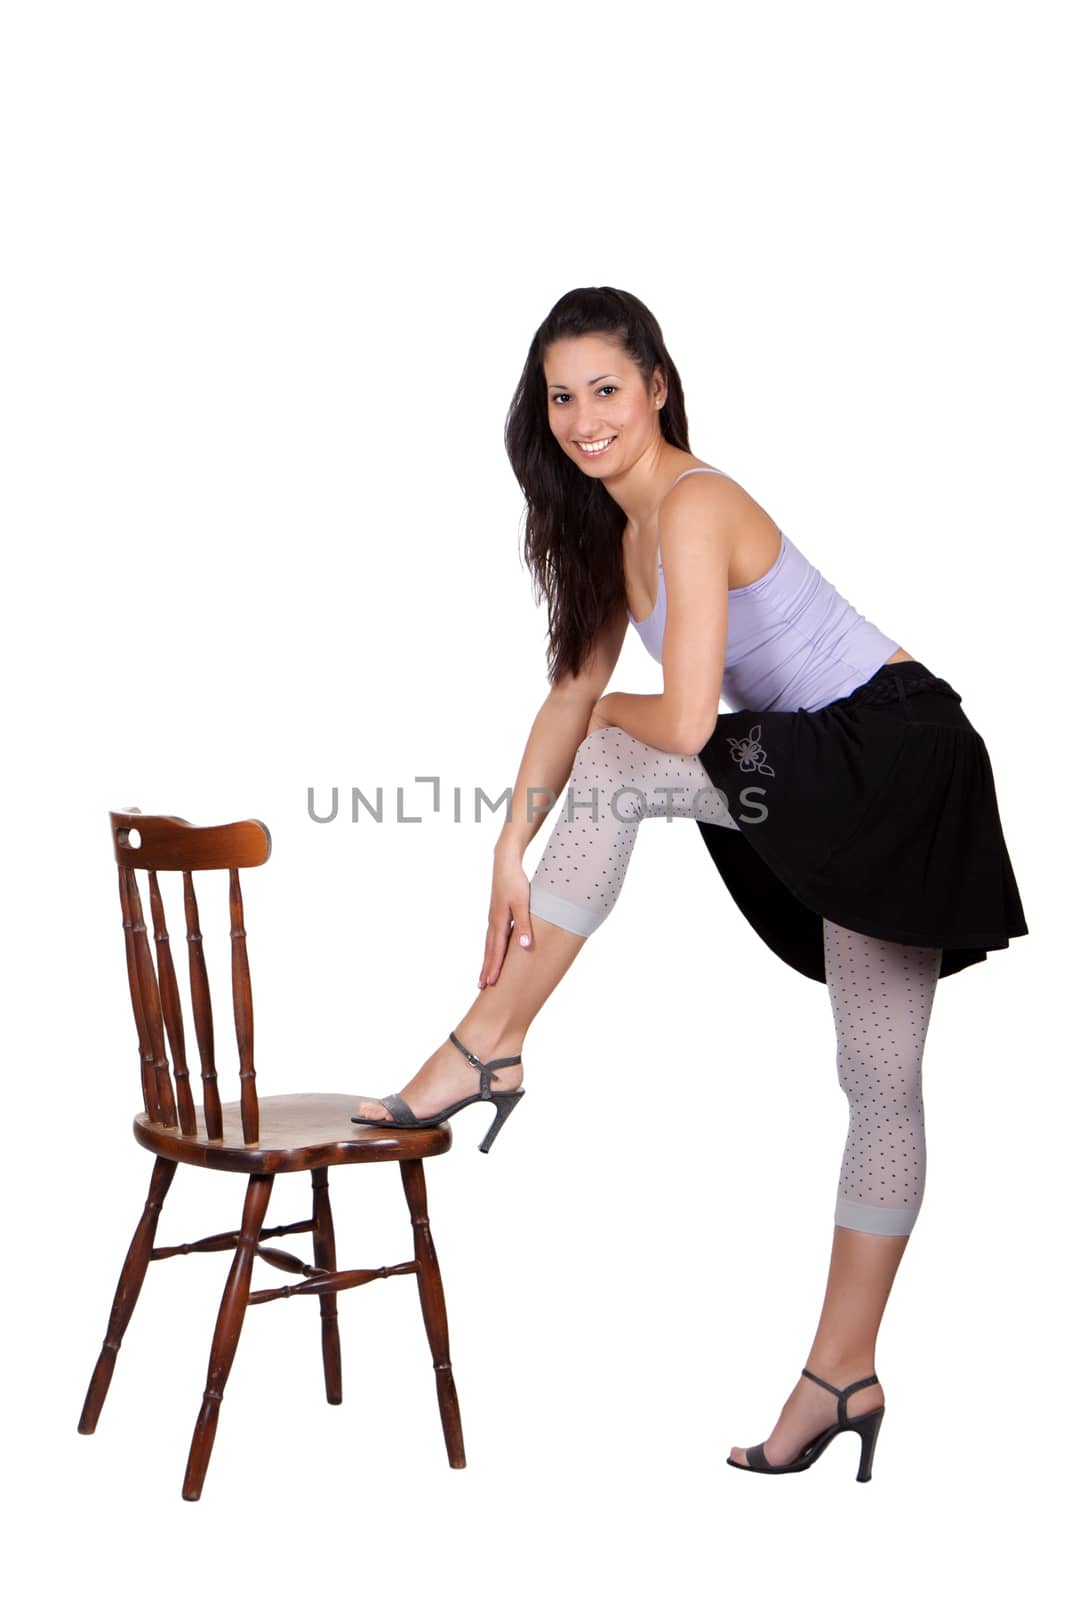 Long-haired brunette woman has landed a leg on a chair, is a smiling, isolated on white background